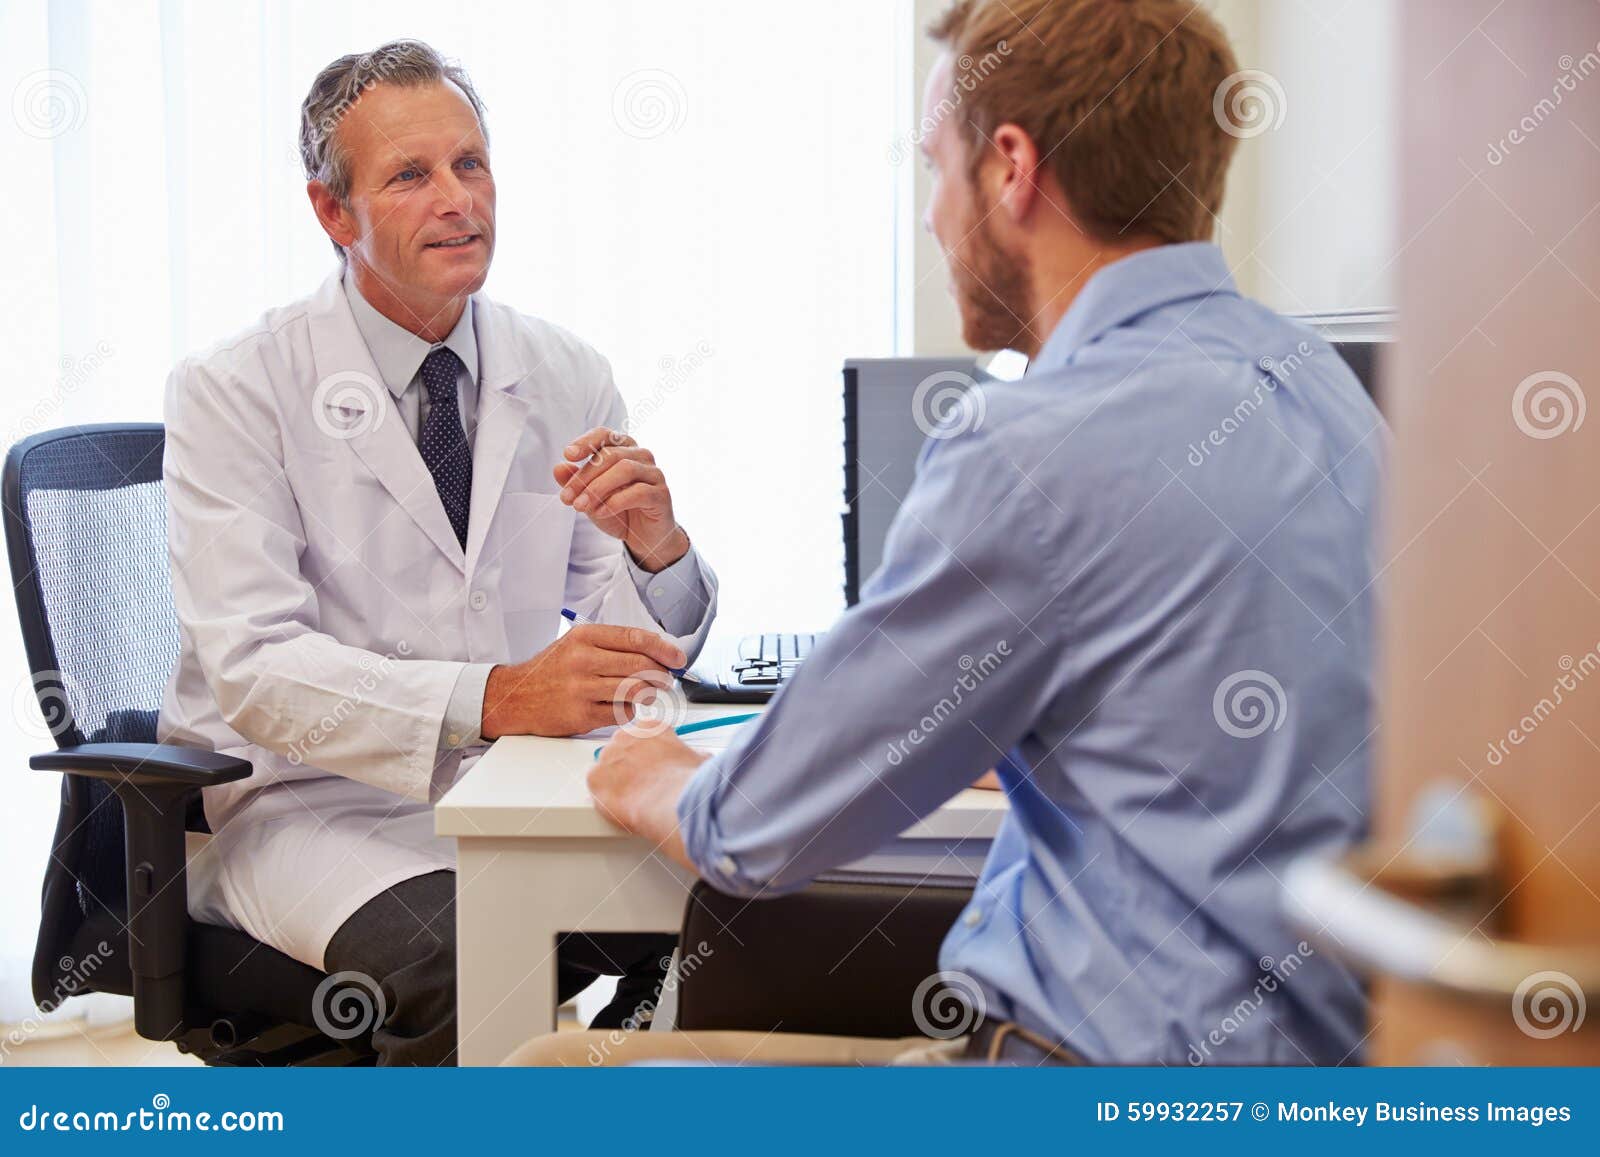 male patient having consultation with doctor in office